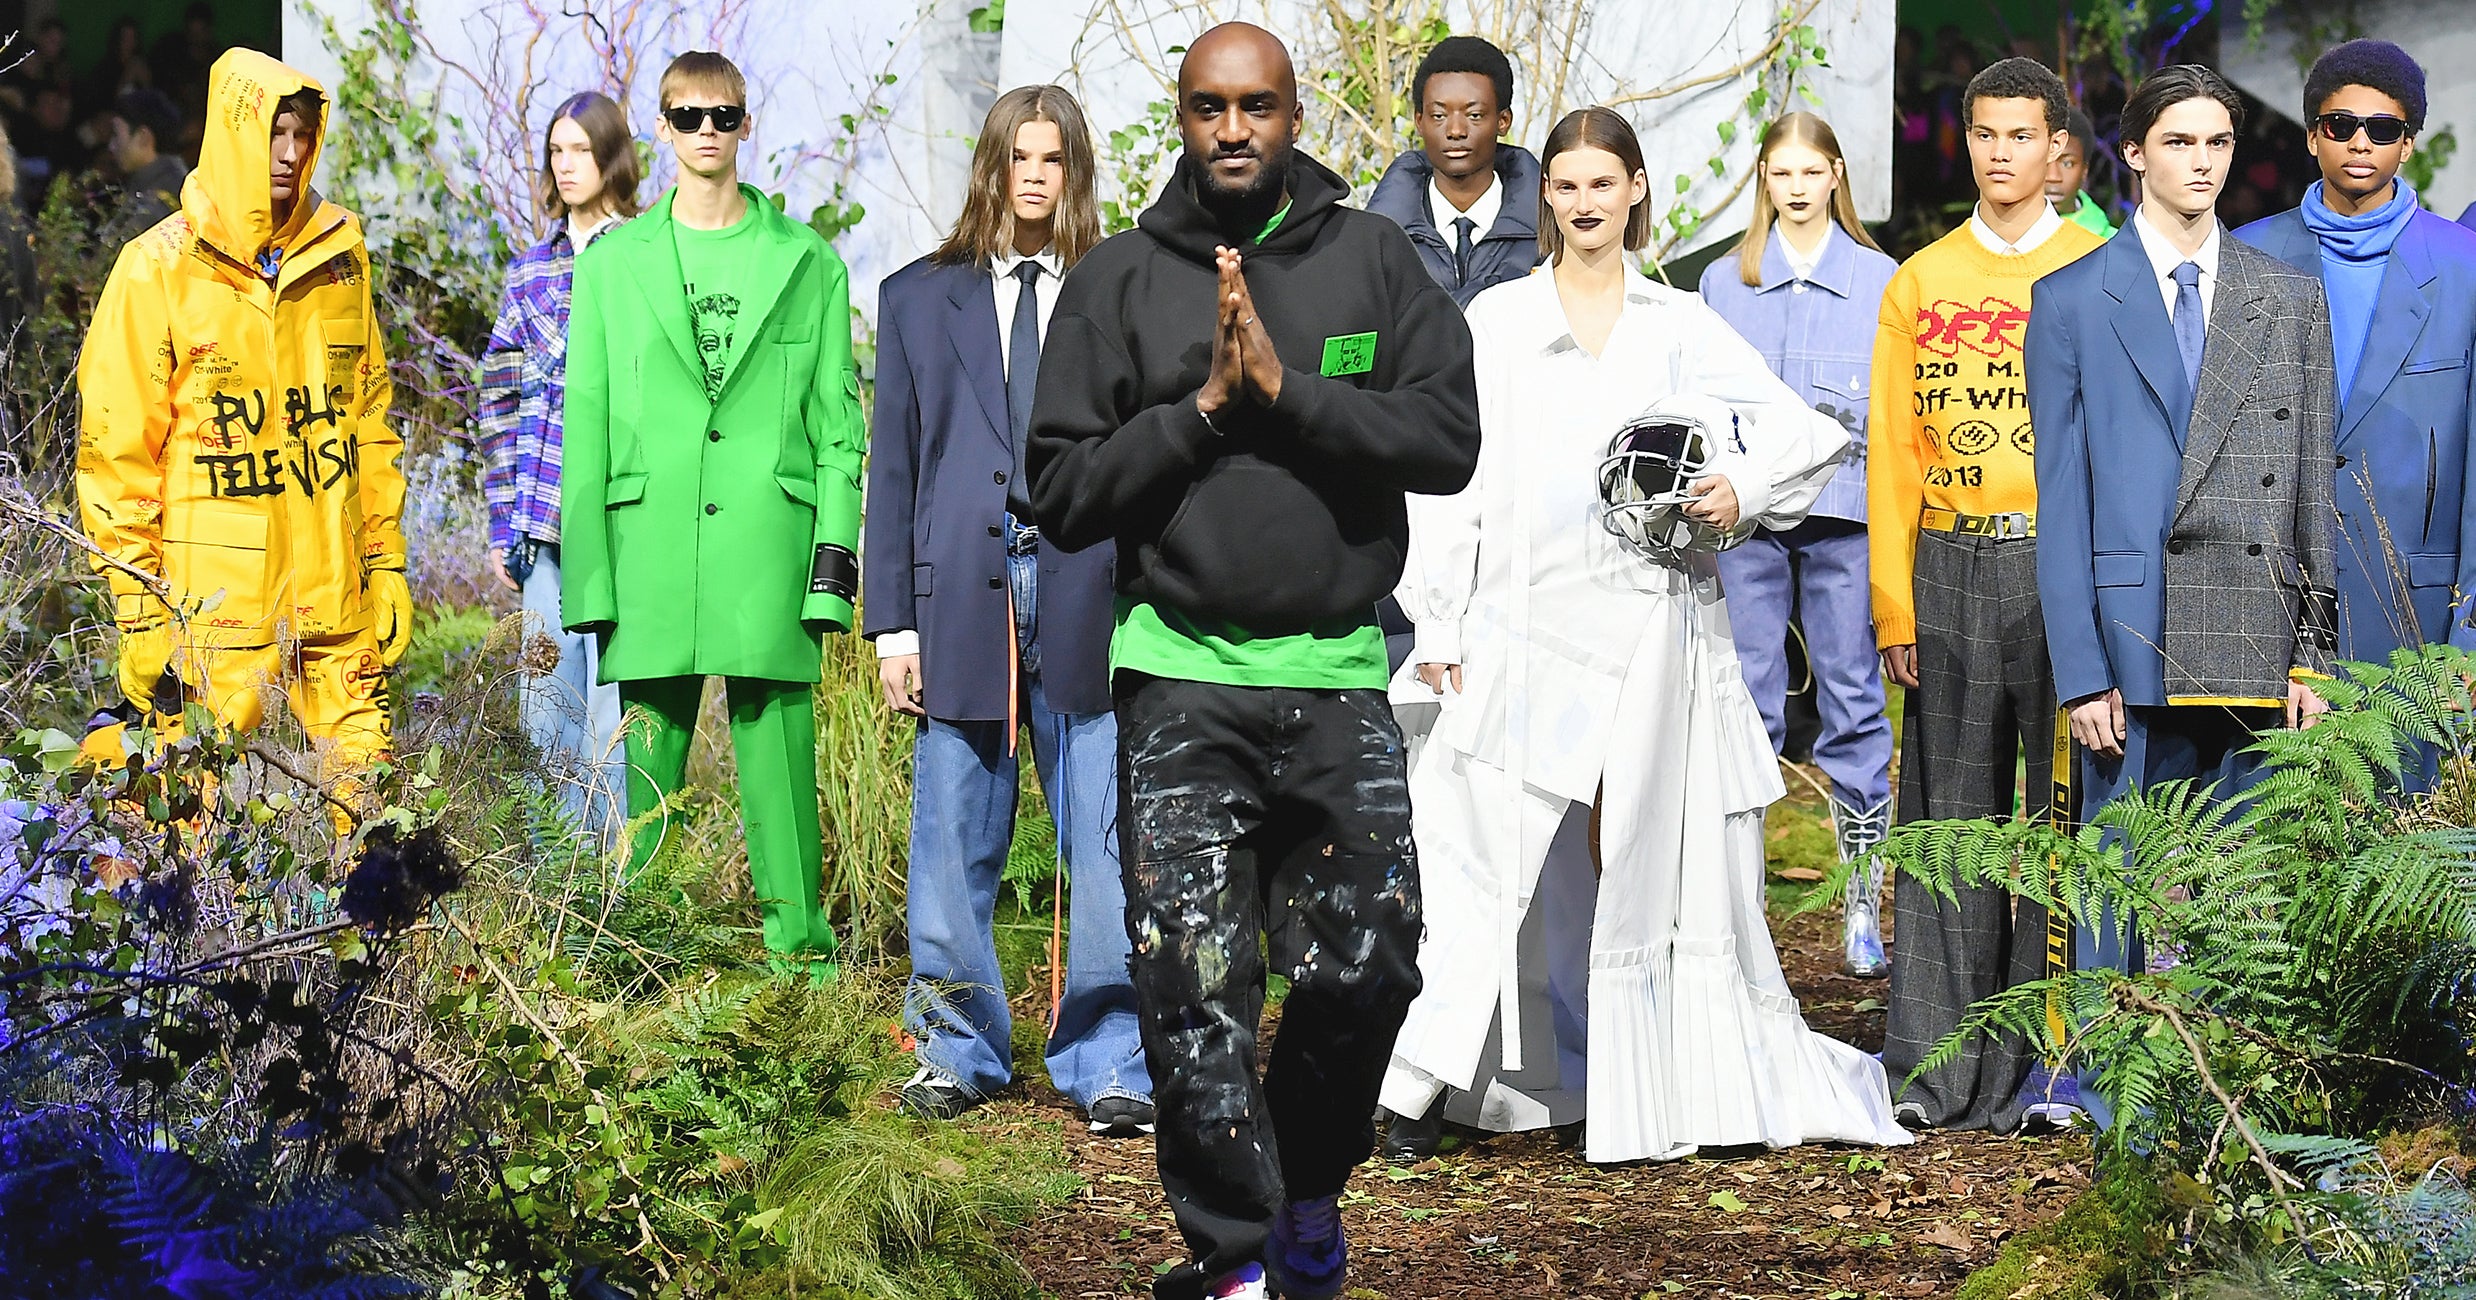 Nike At The Museum: Inside the Private View of Virgil Abloh's Design Legacy